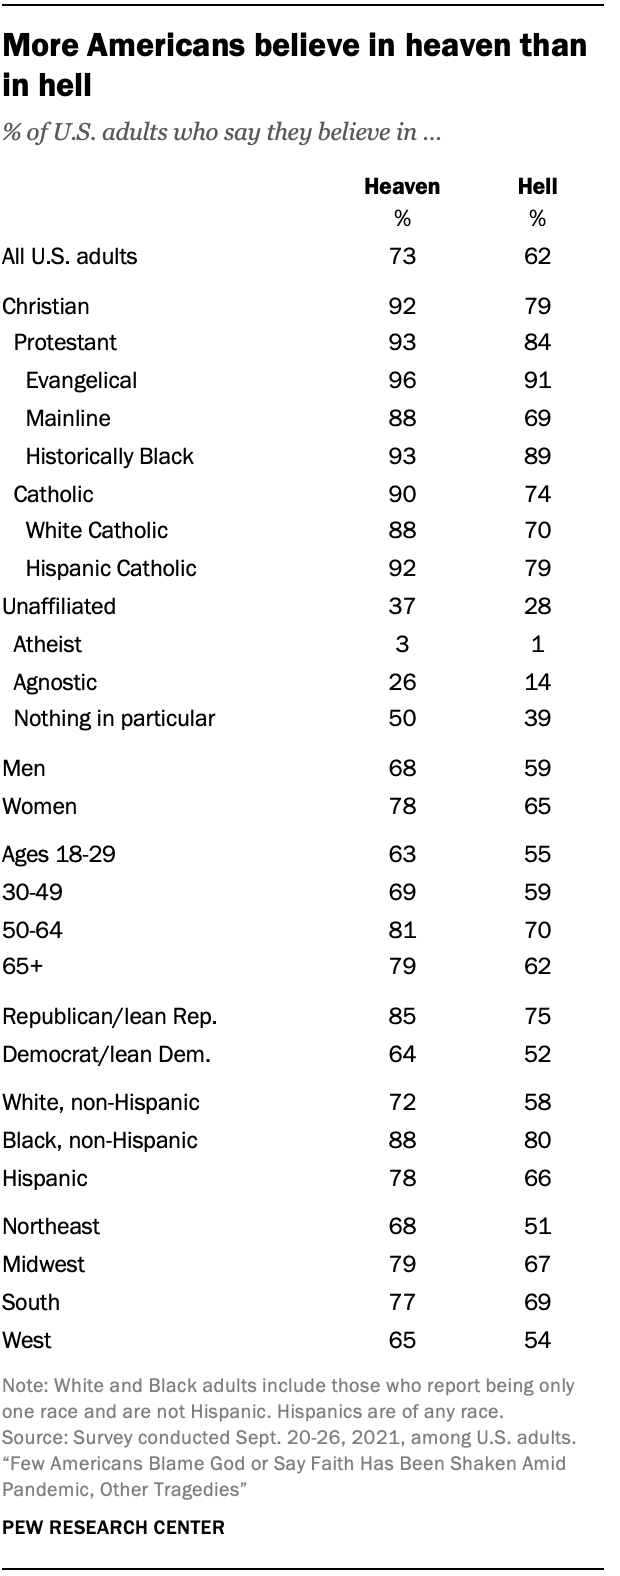 More Americans believe in heaven than in hell